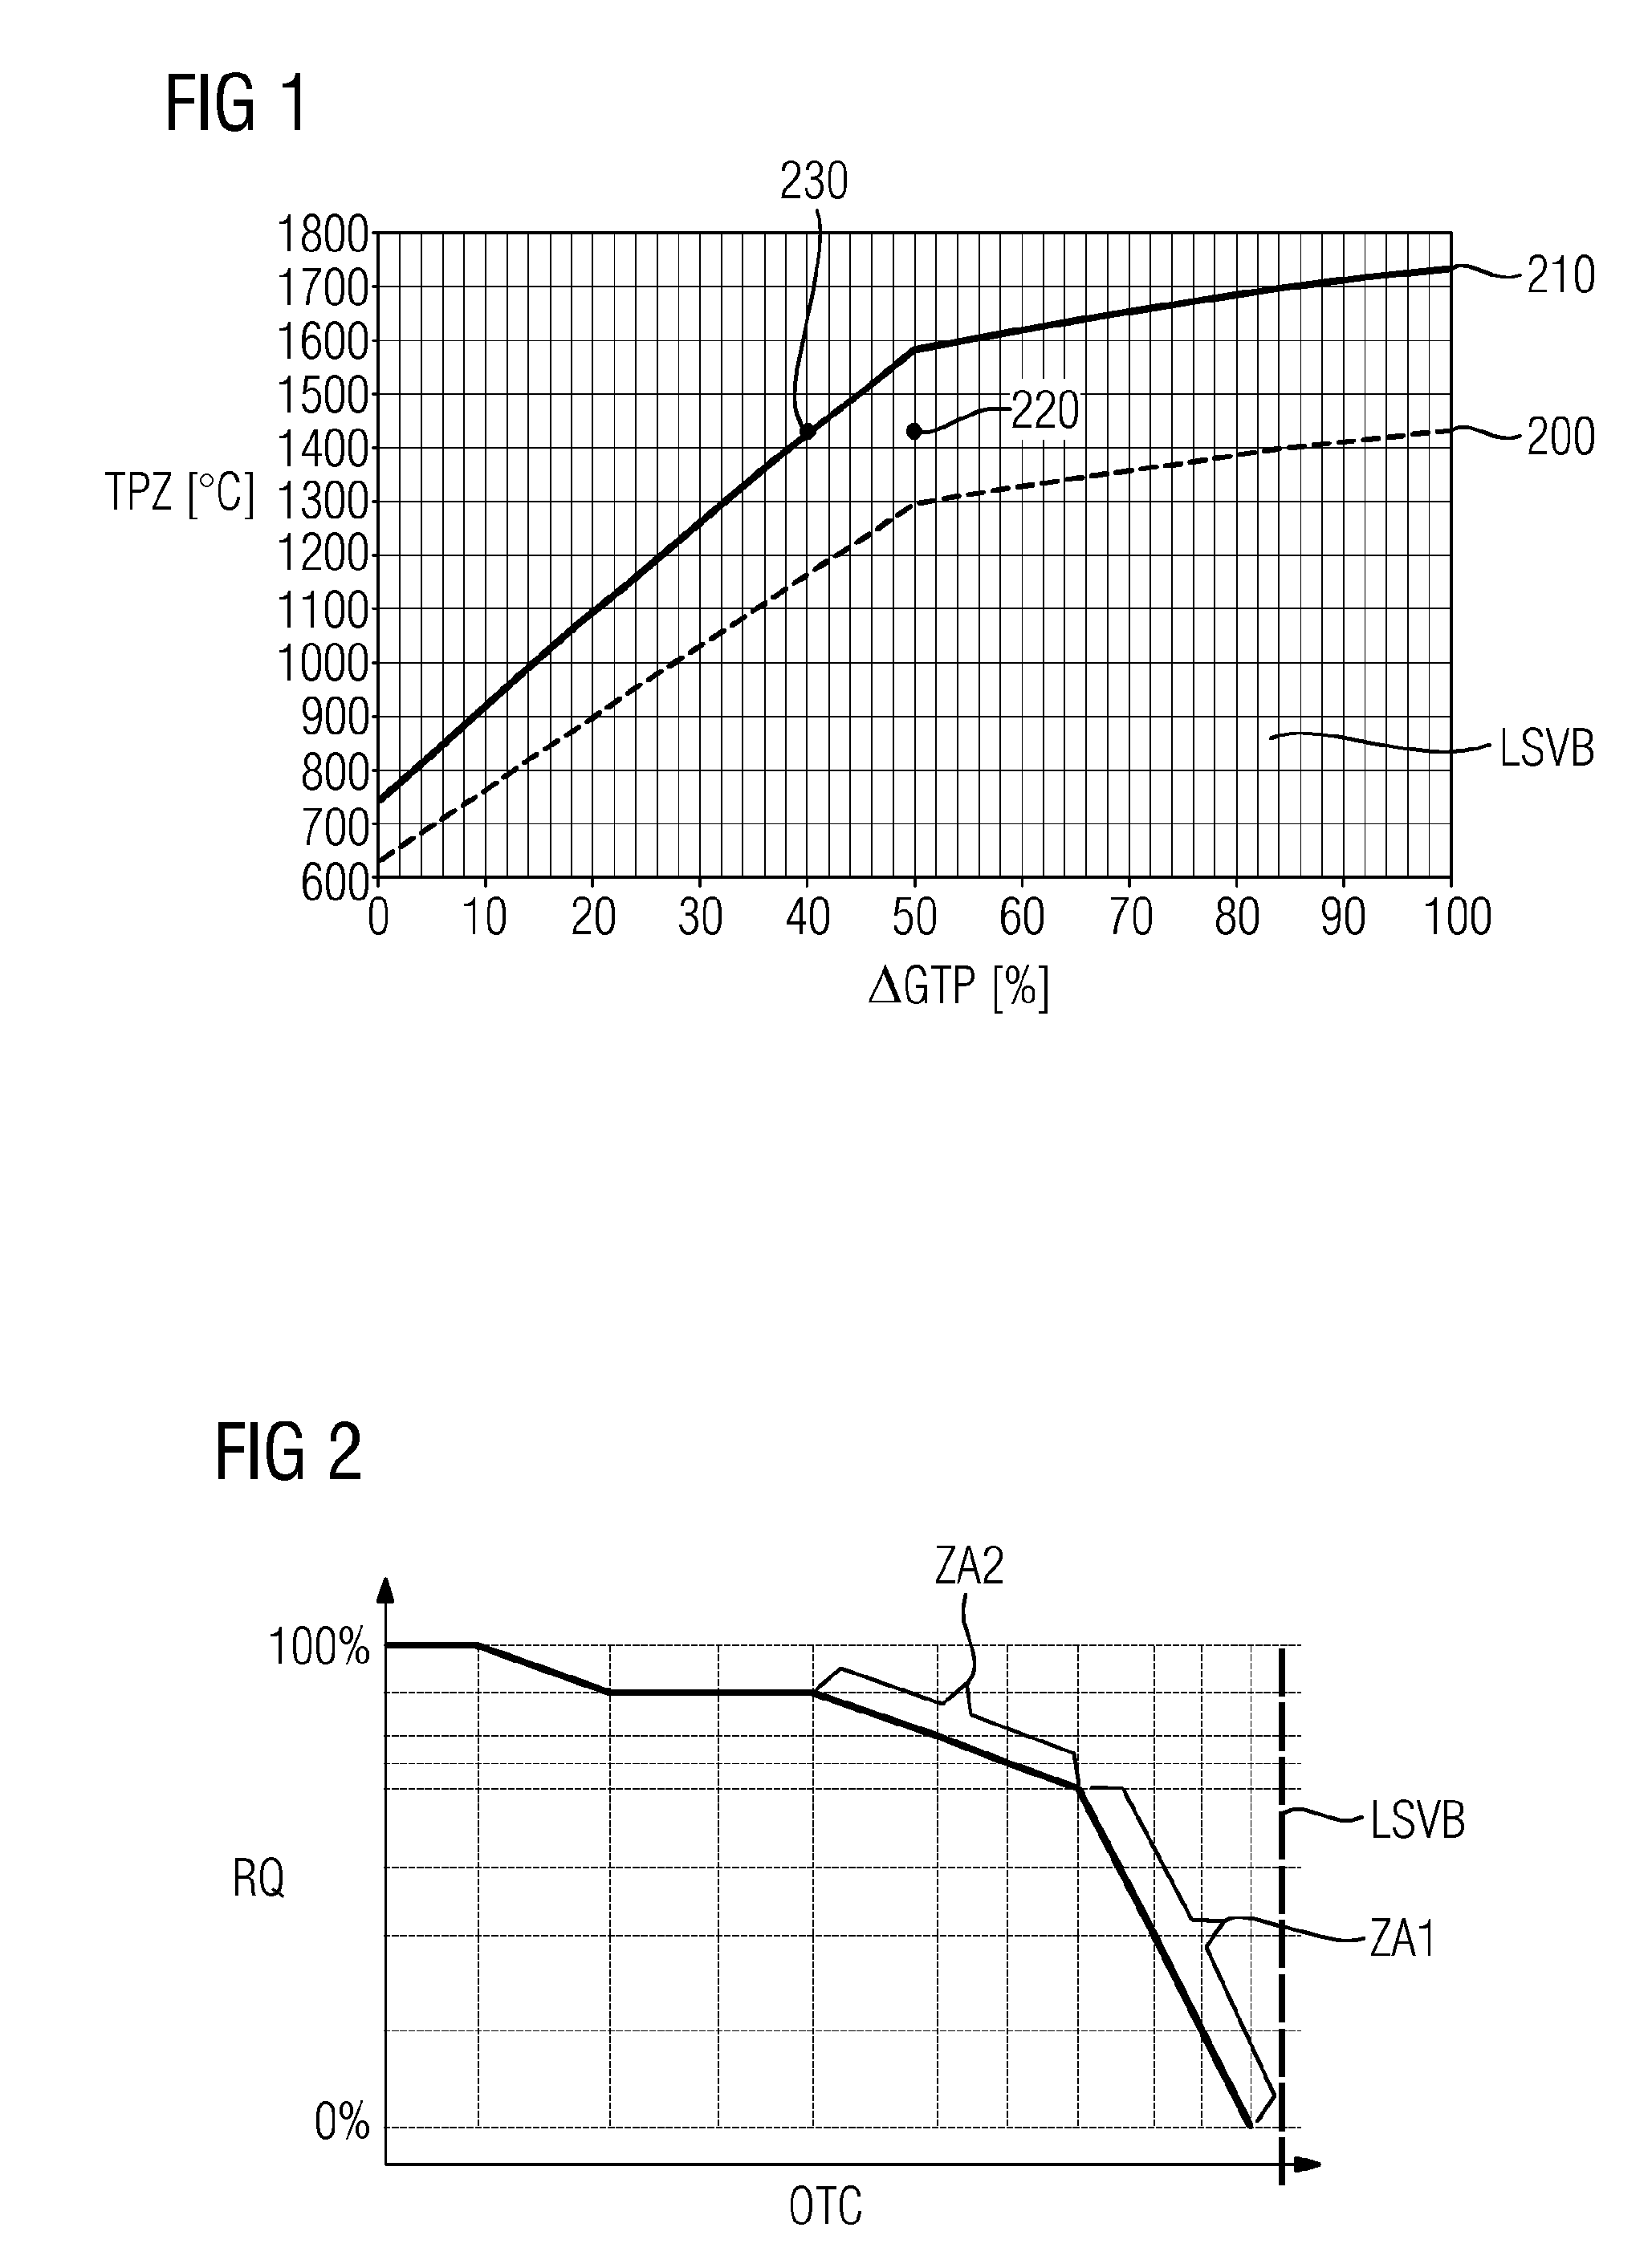 Partial-load operation of a gas turbine with an adjustable bypass flow channel